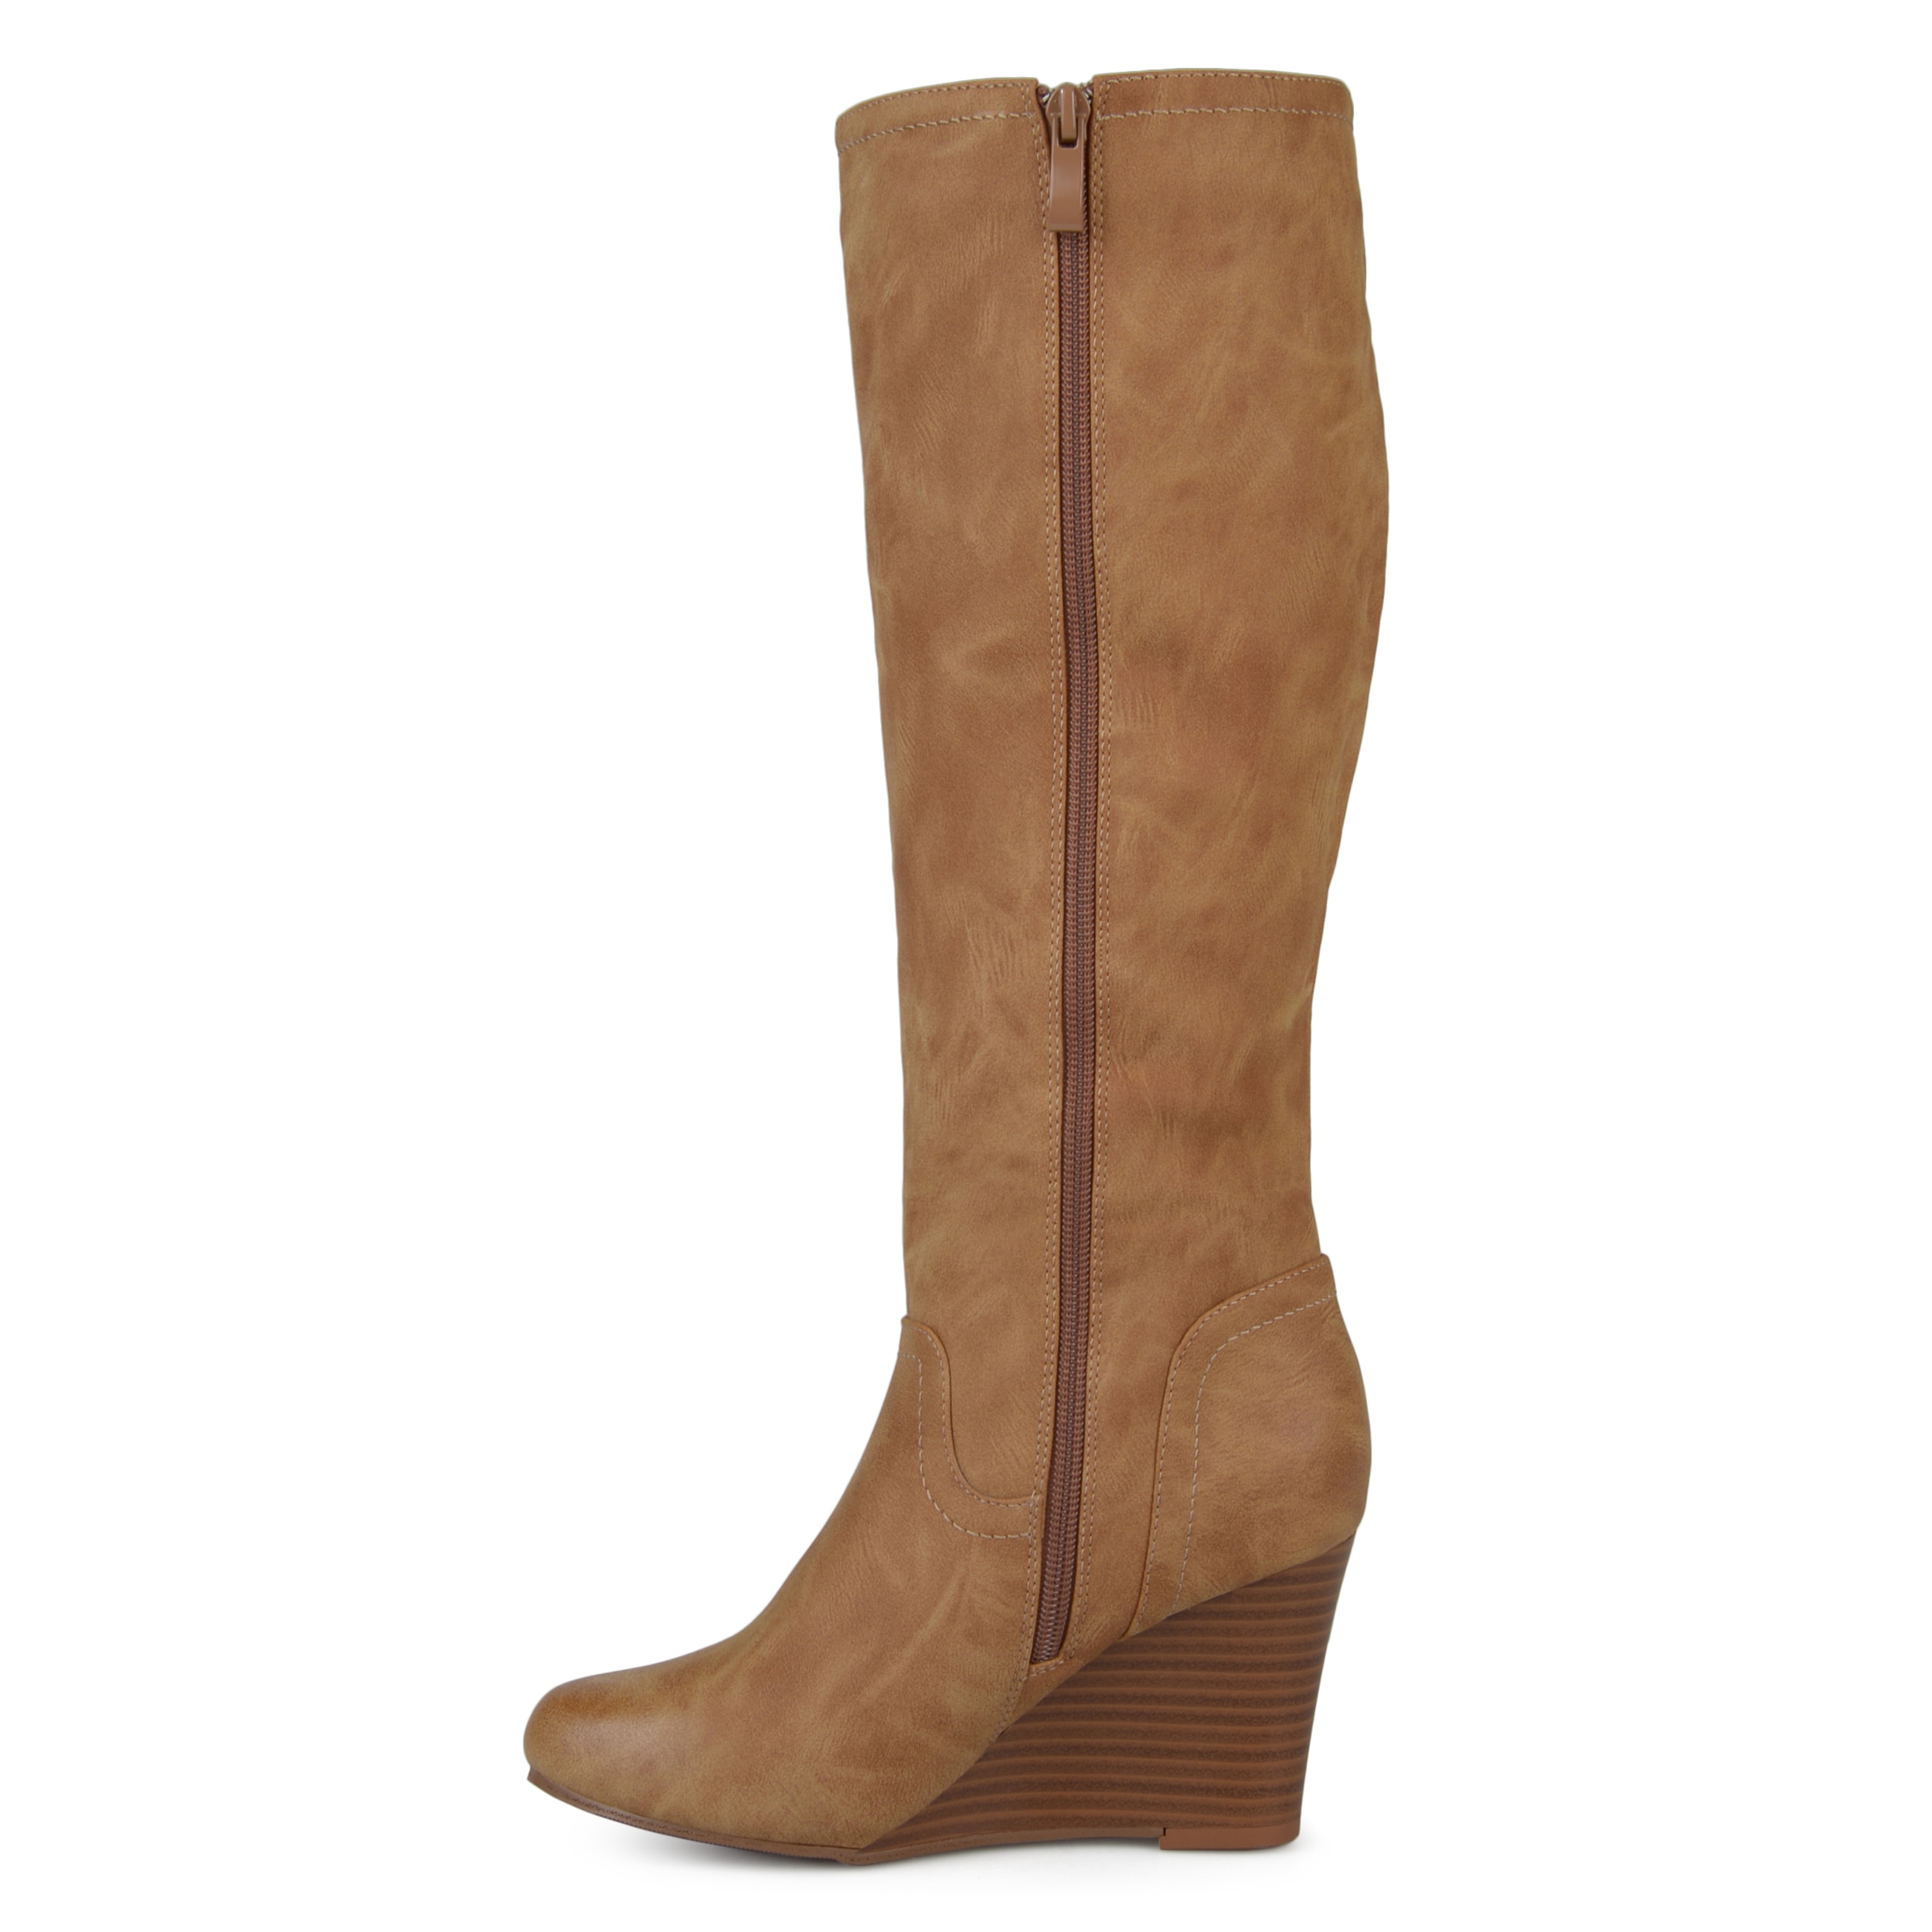 tan leather wedge boots